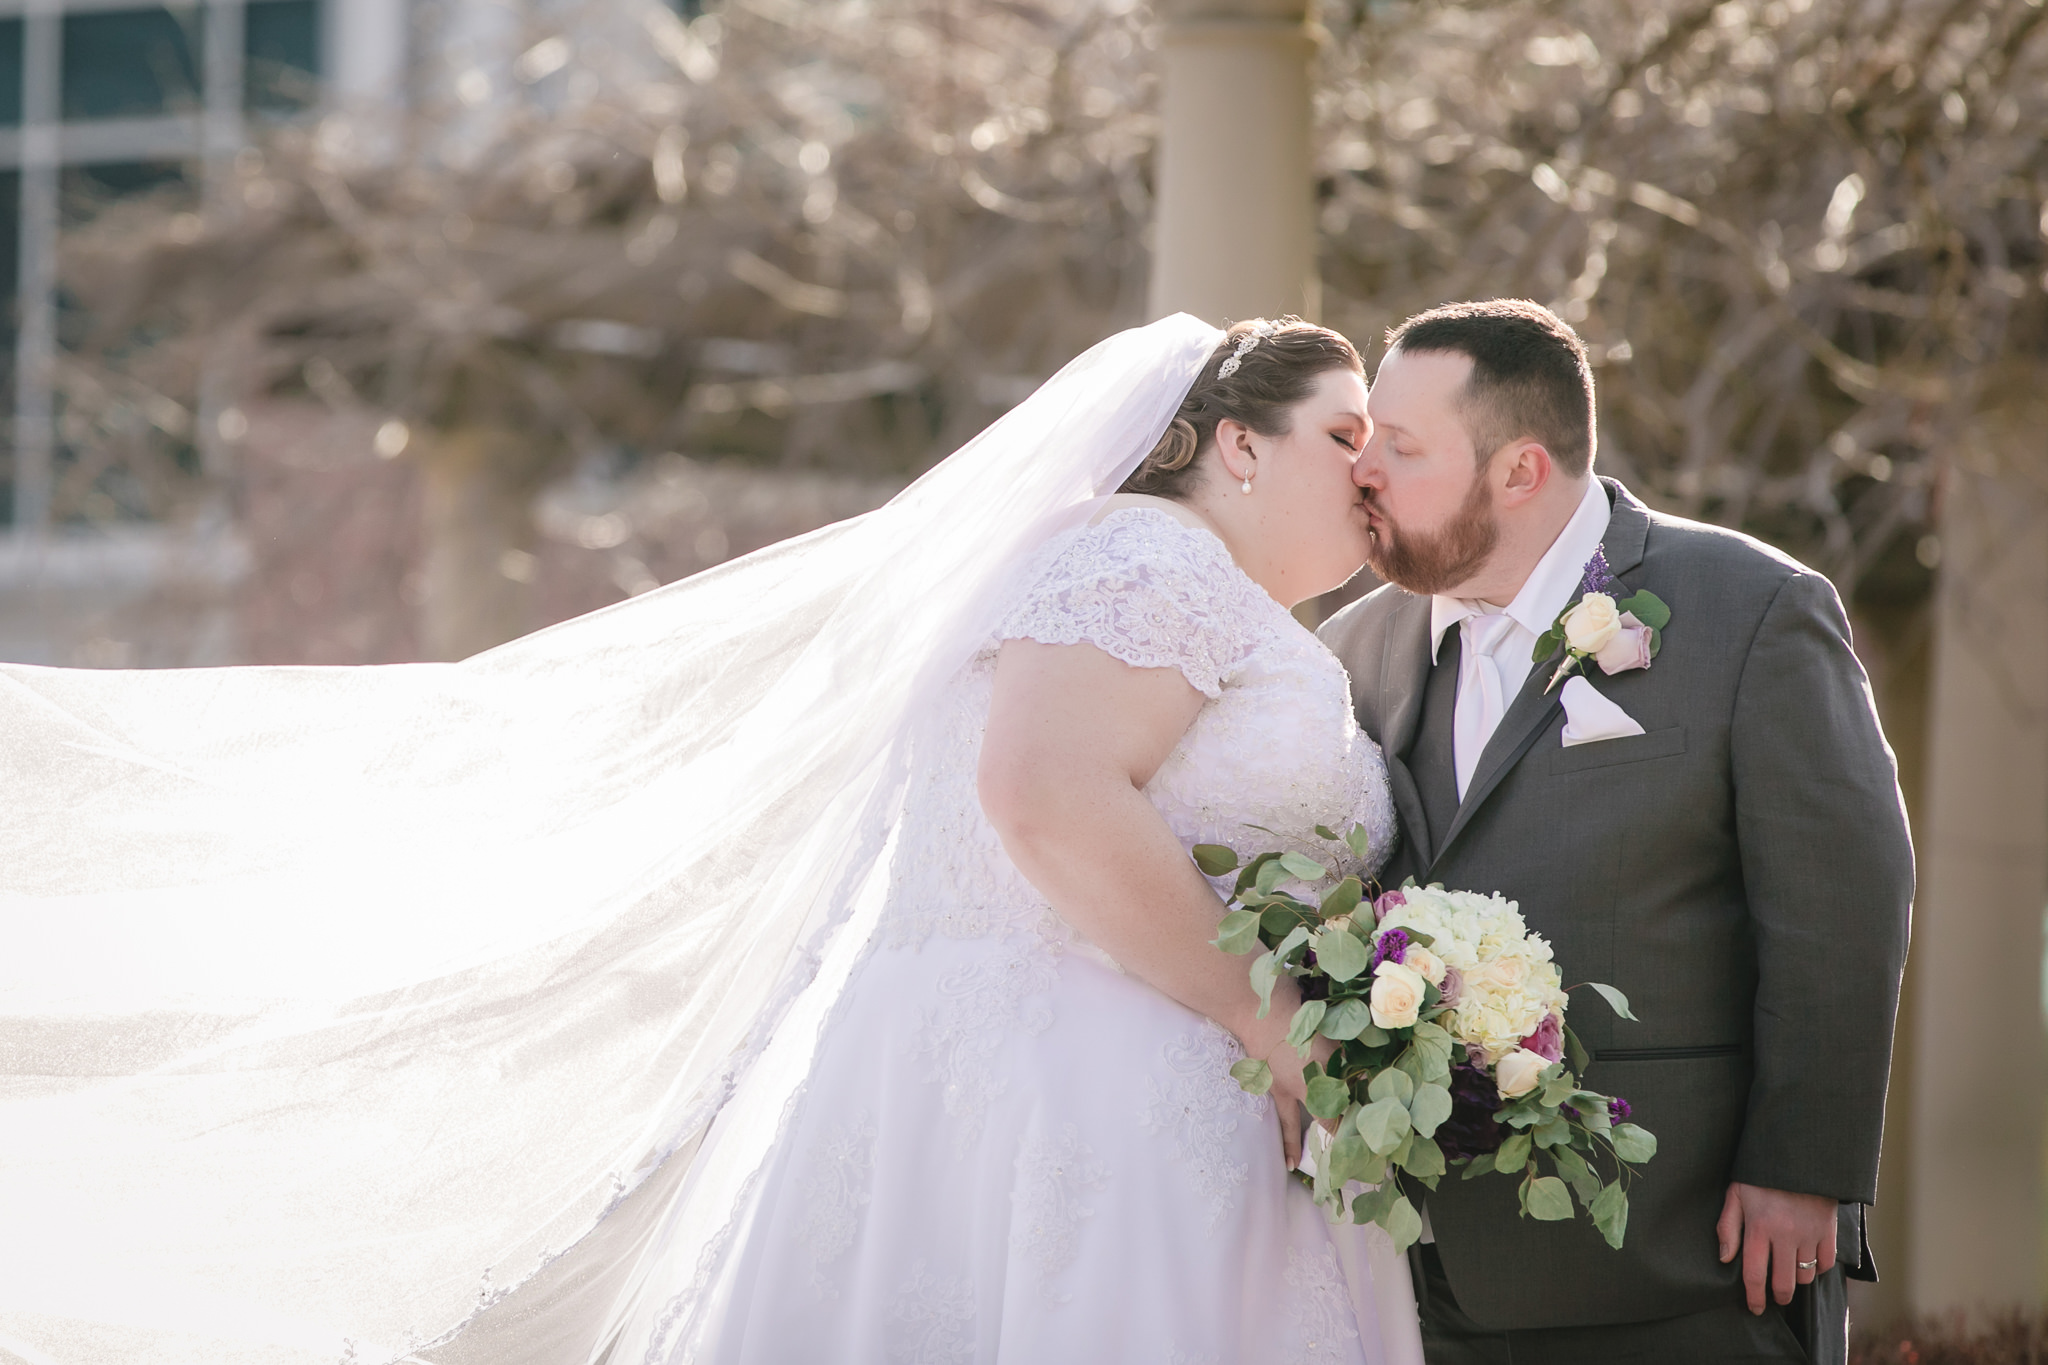 Bride's cathedral veil blows in the wind as she kisses her groom at Robert Morris University